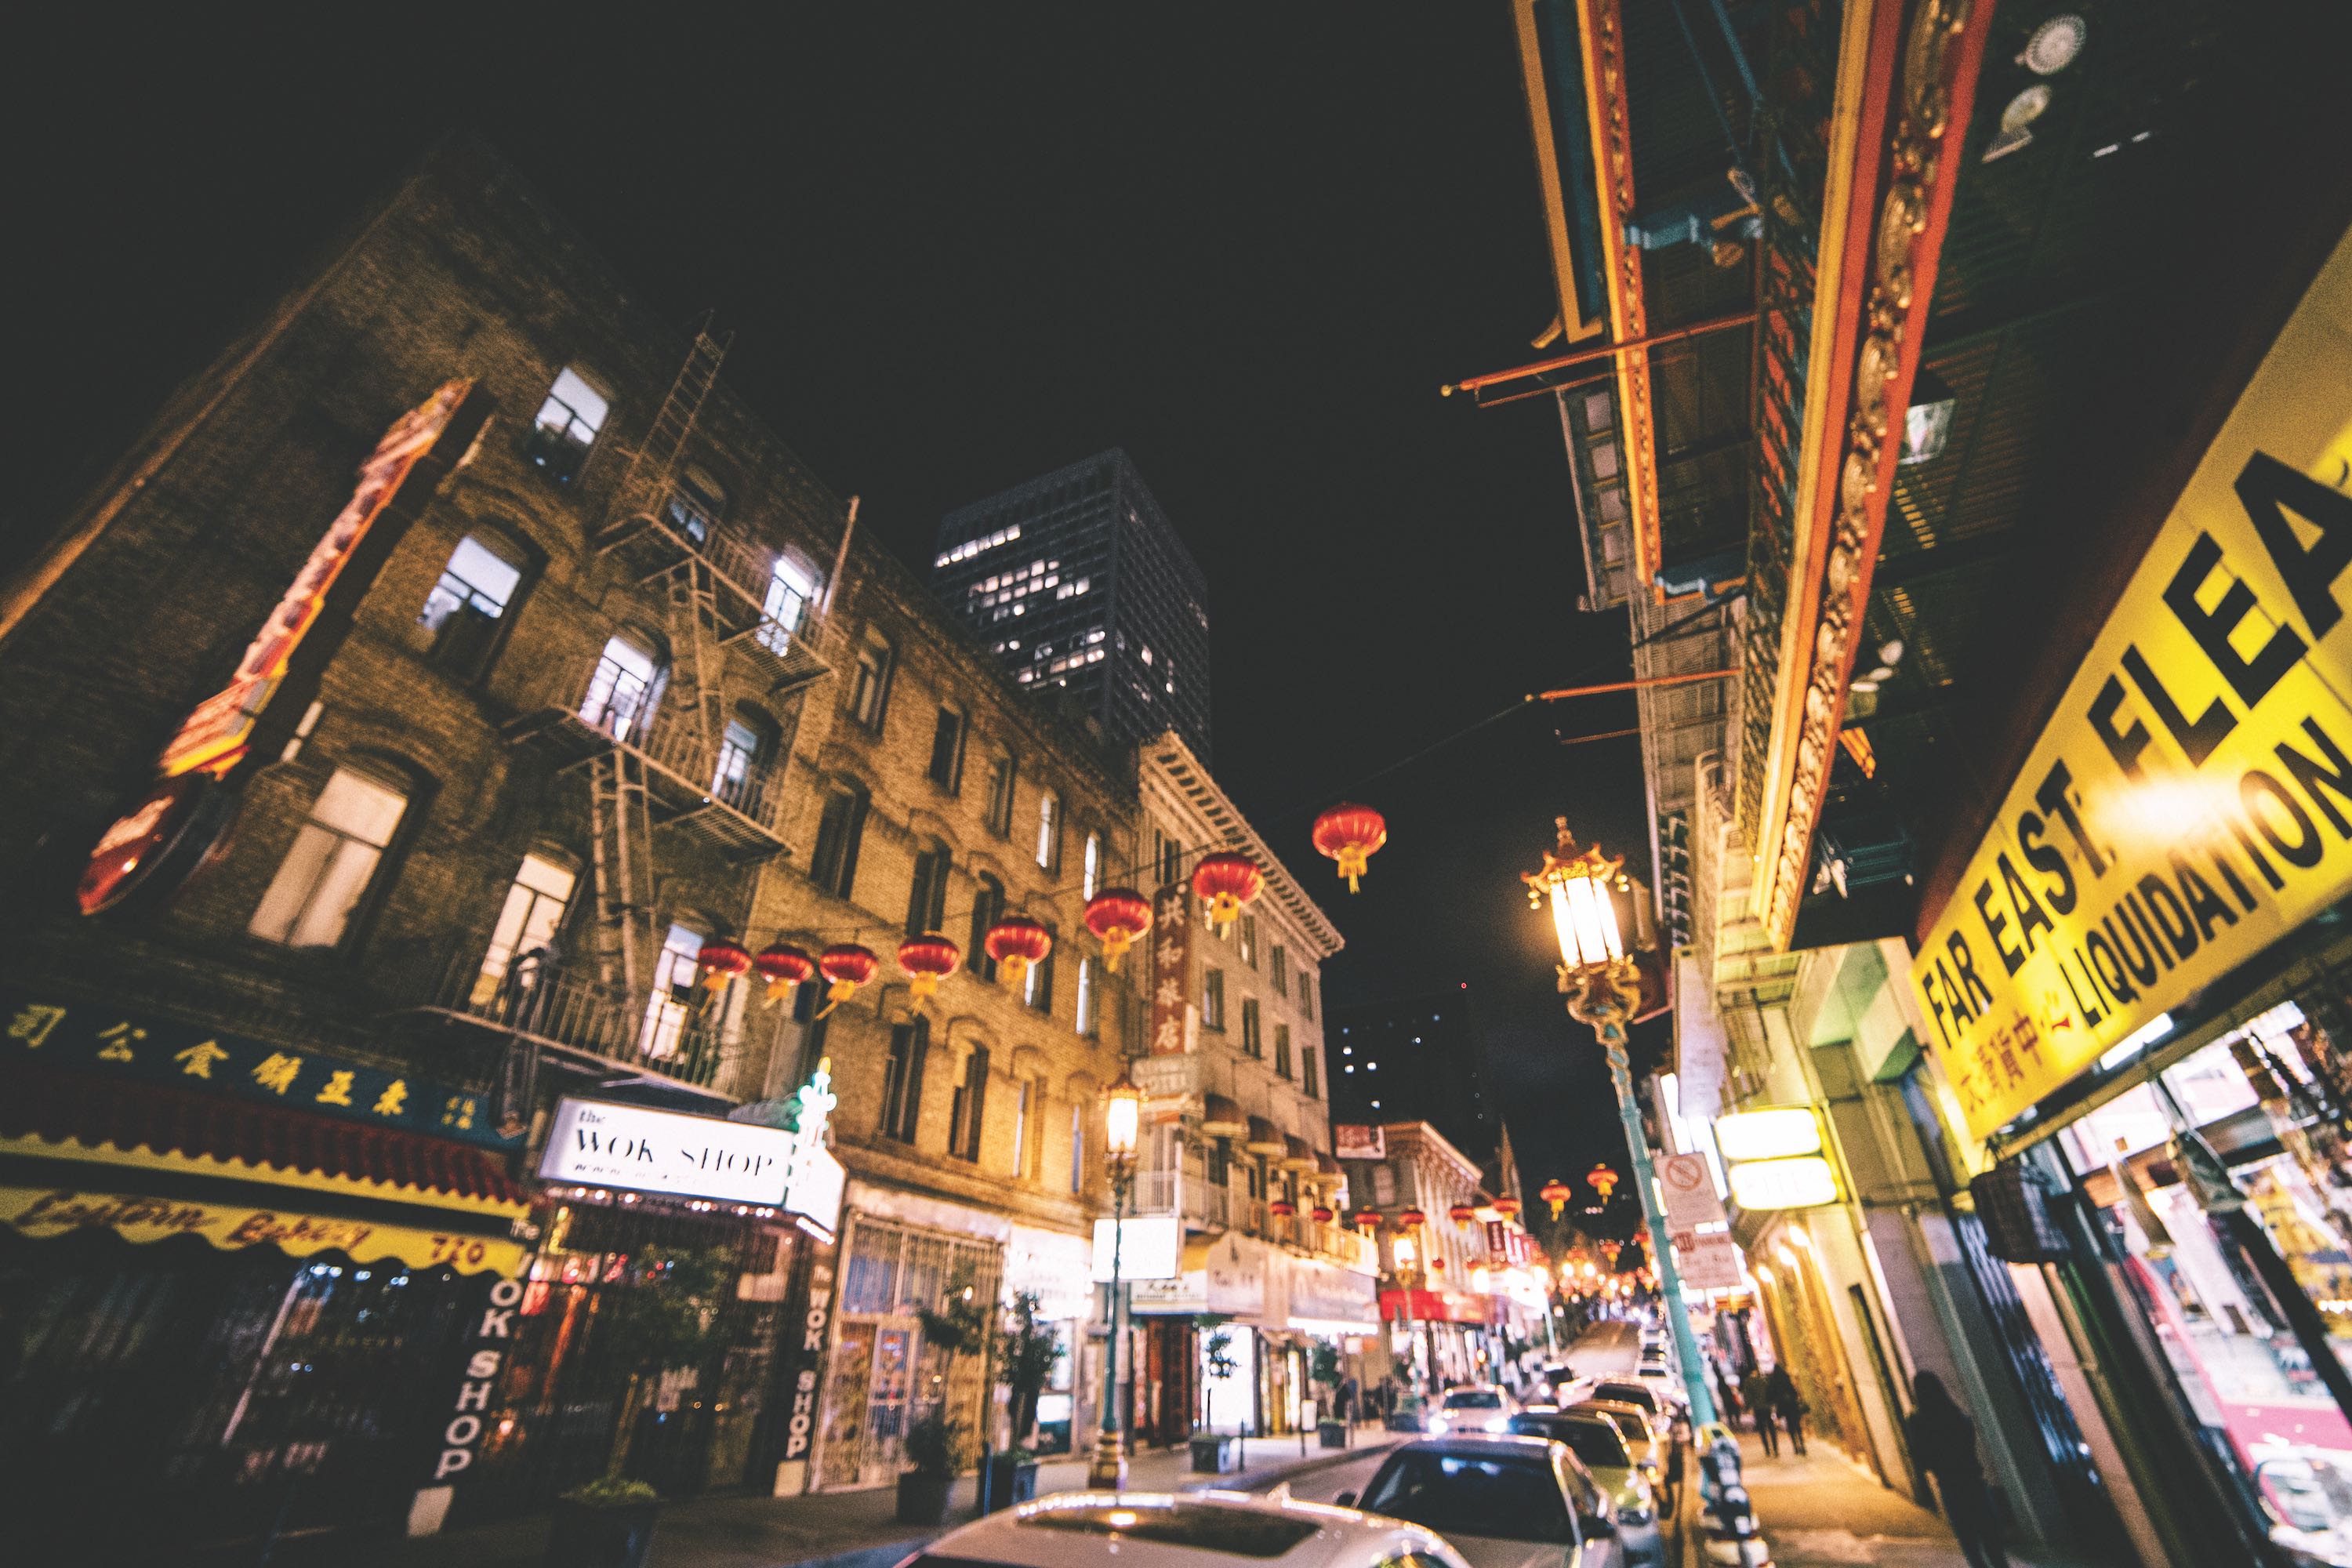 China Town streets